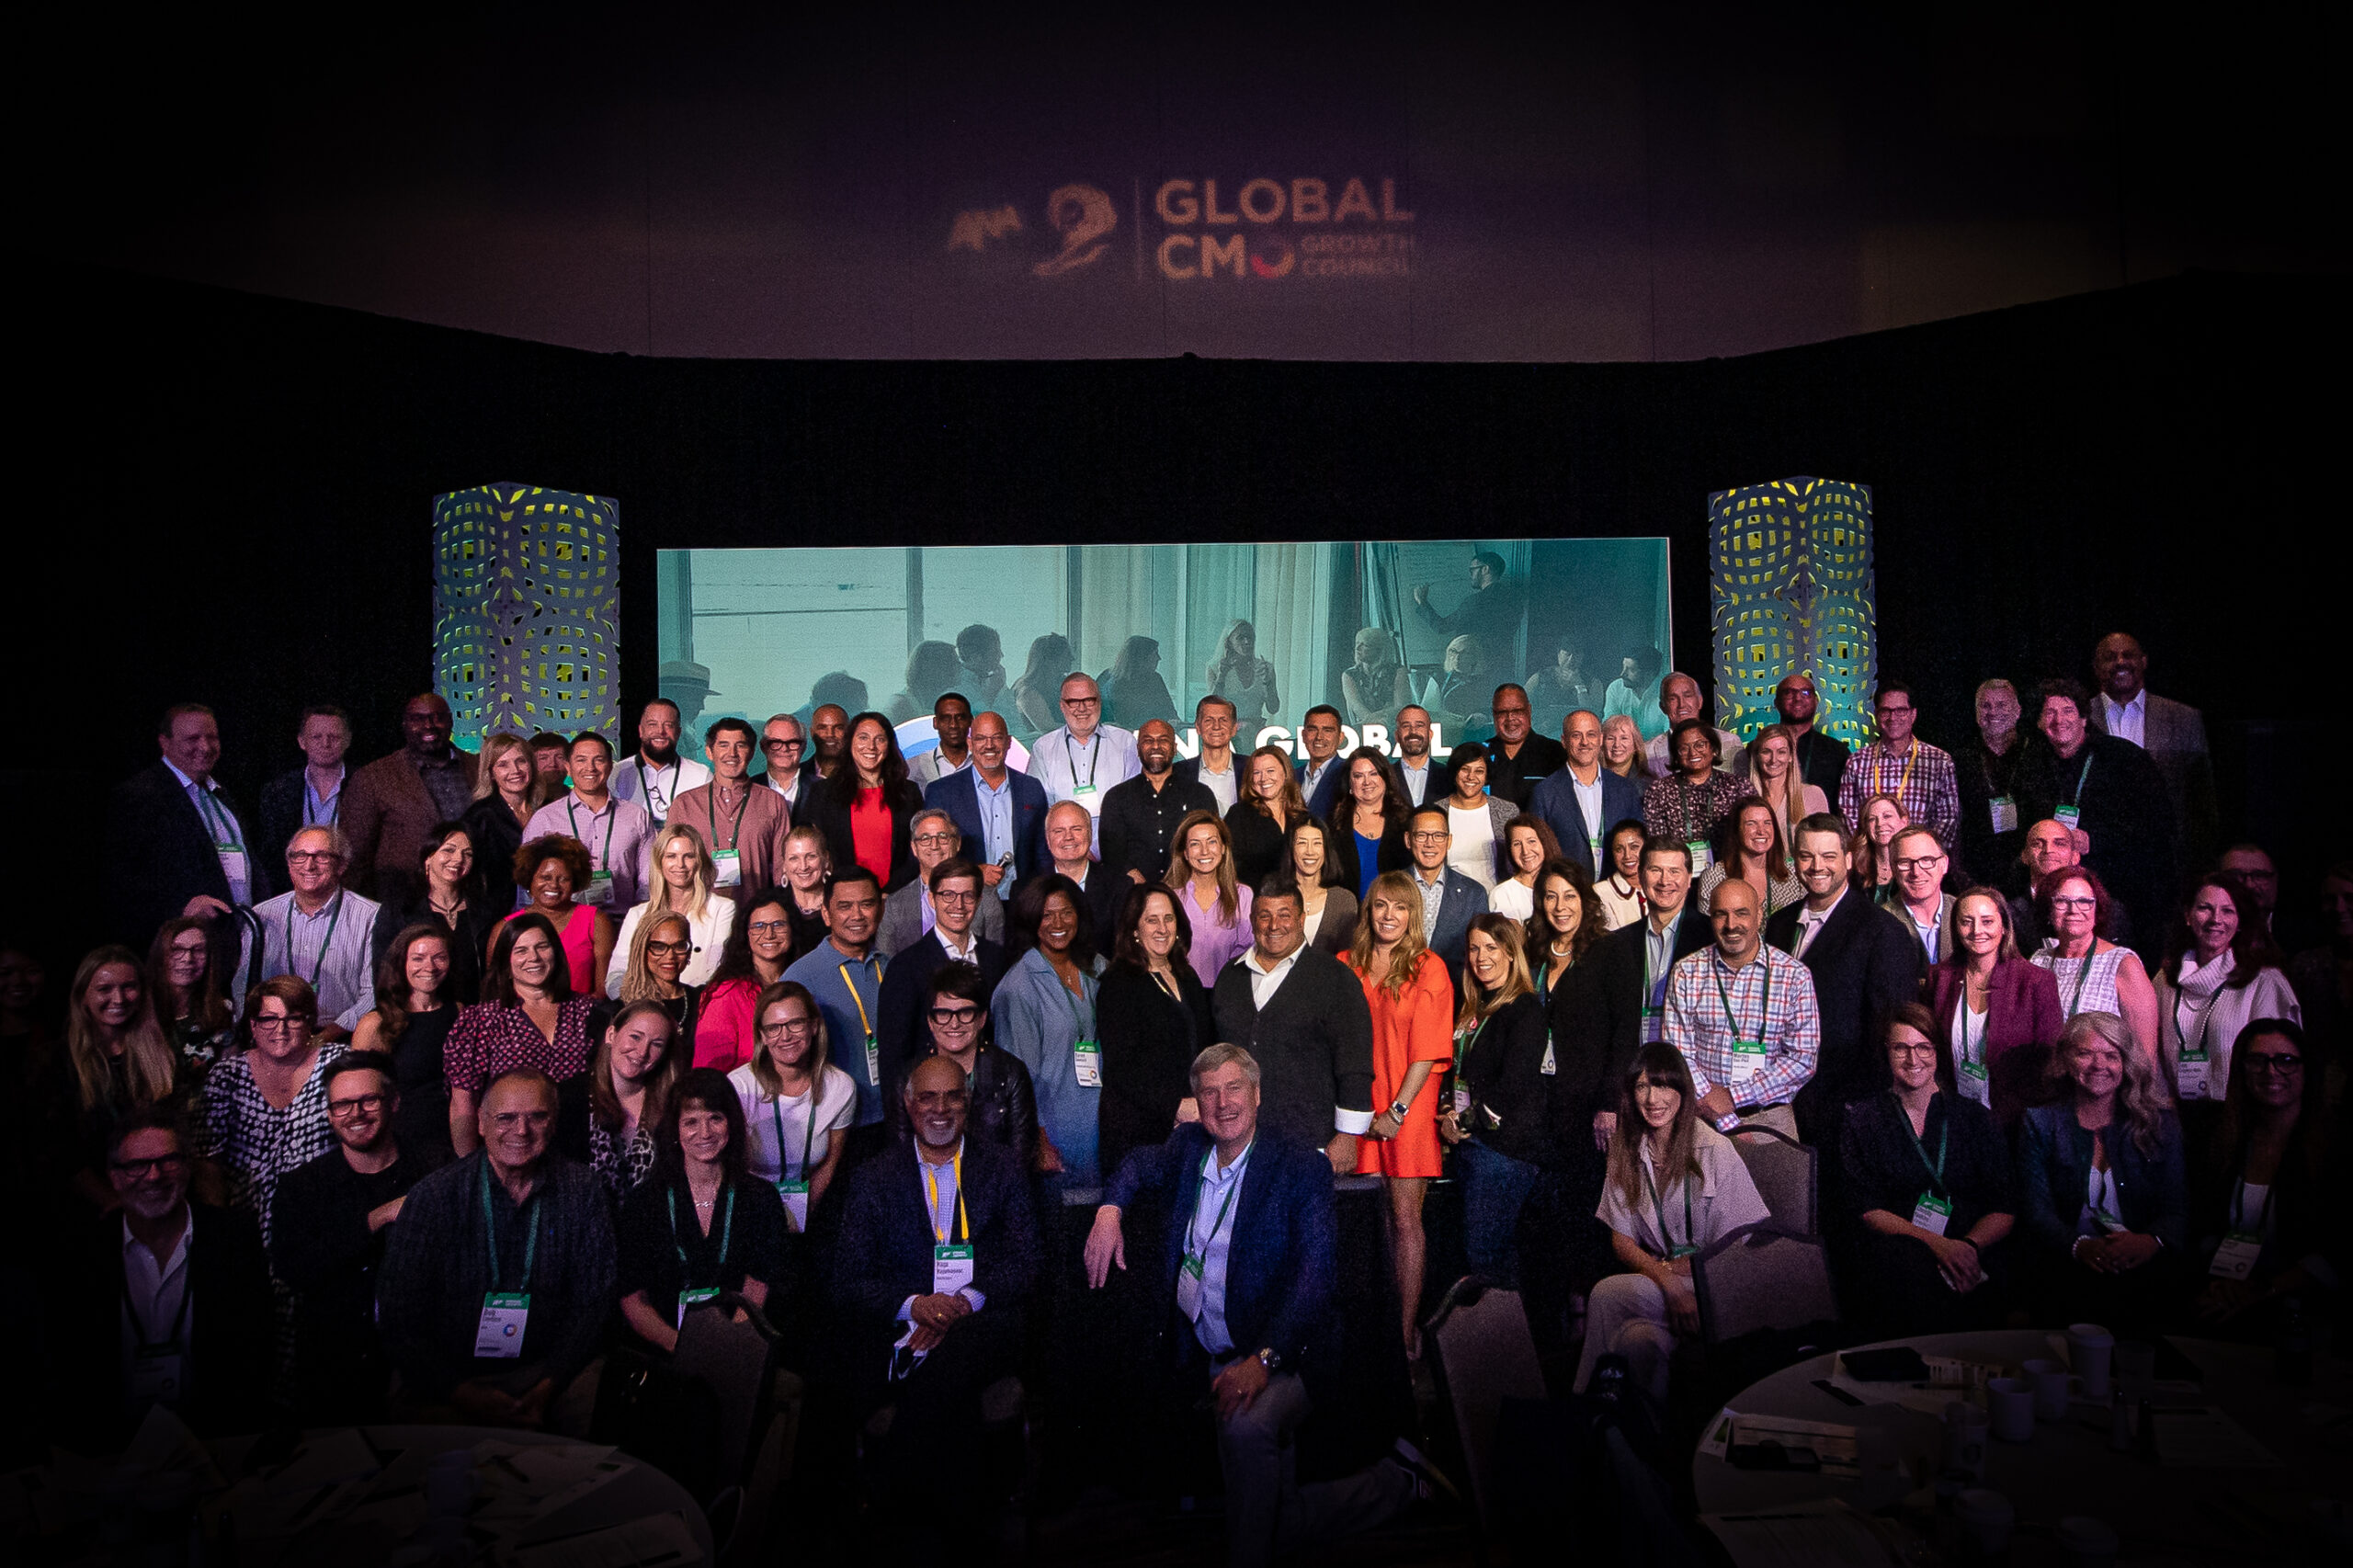 The Global CMO Growth Council